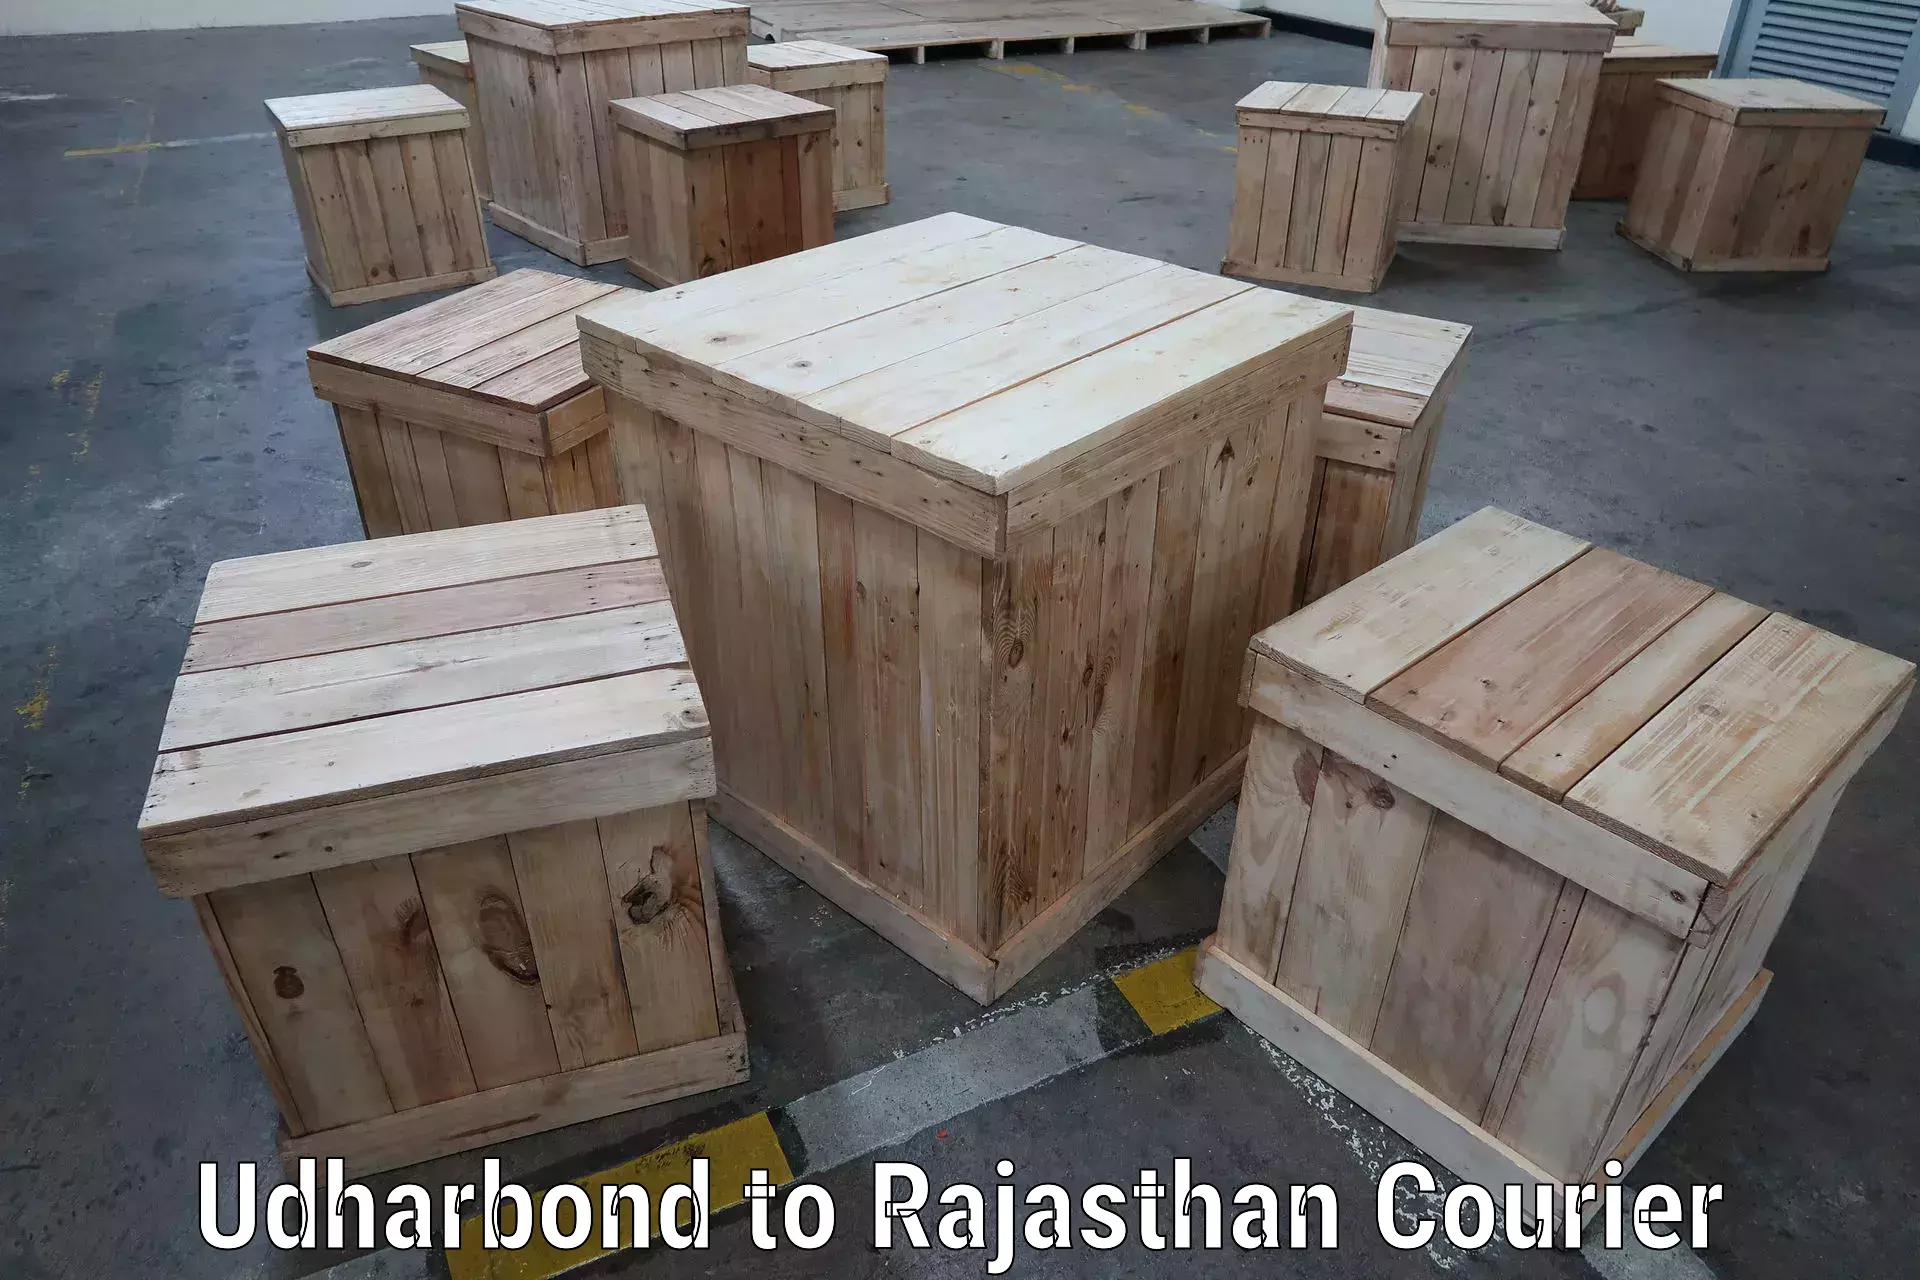 Global shipping solutions in Udharbond to Bhilwara